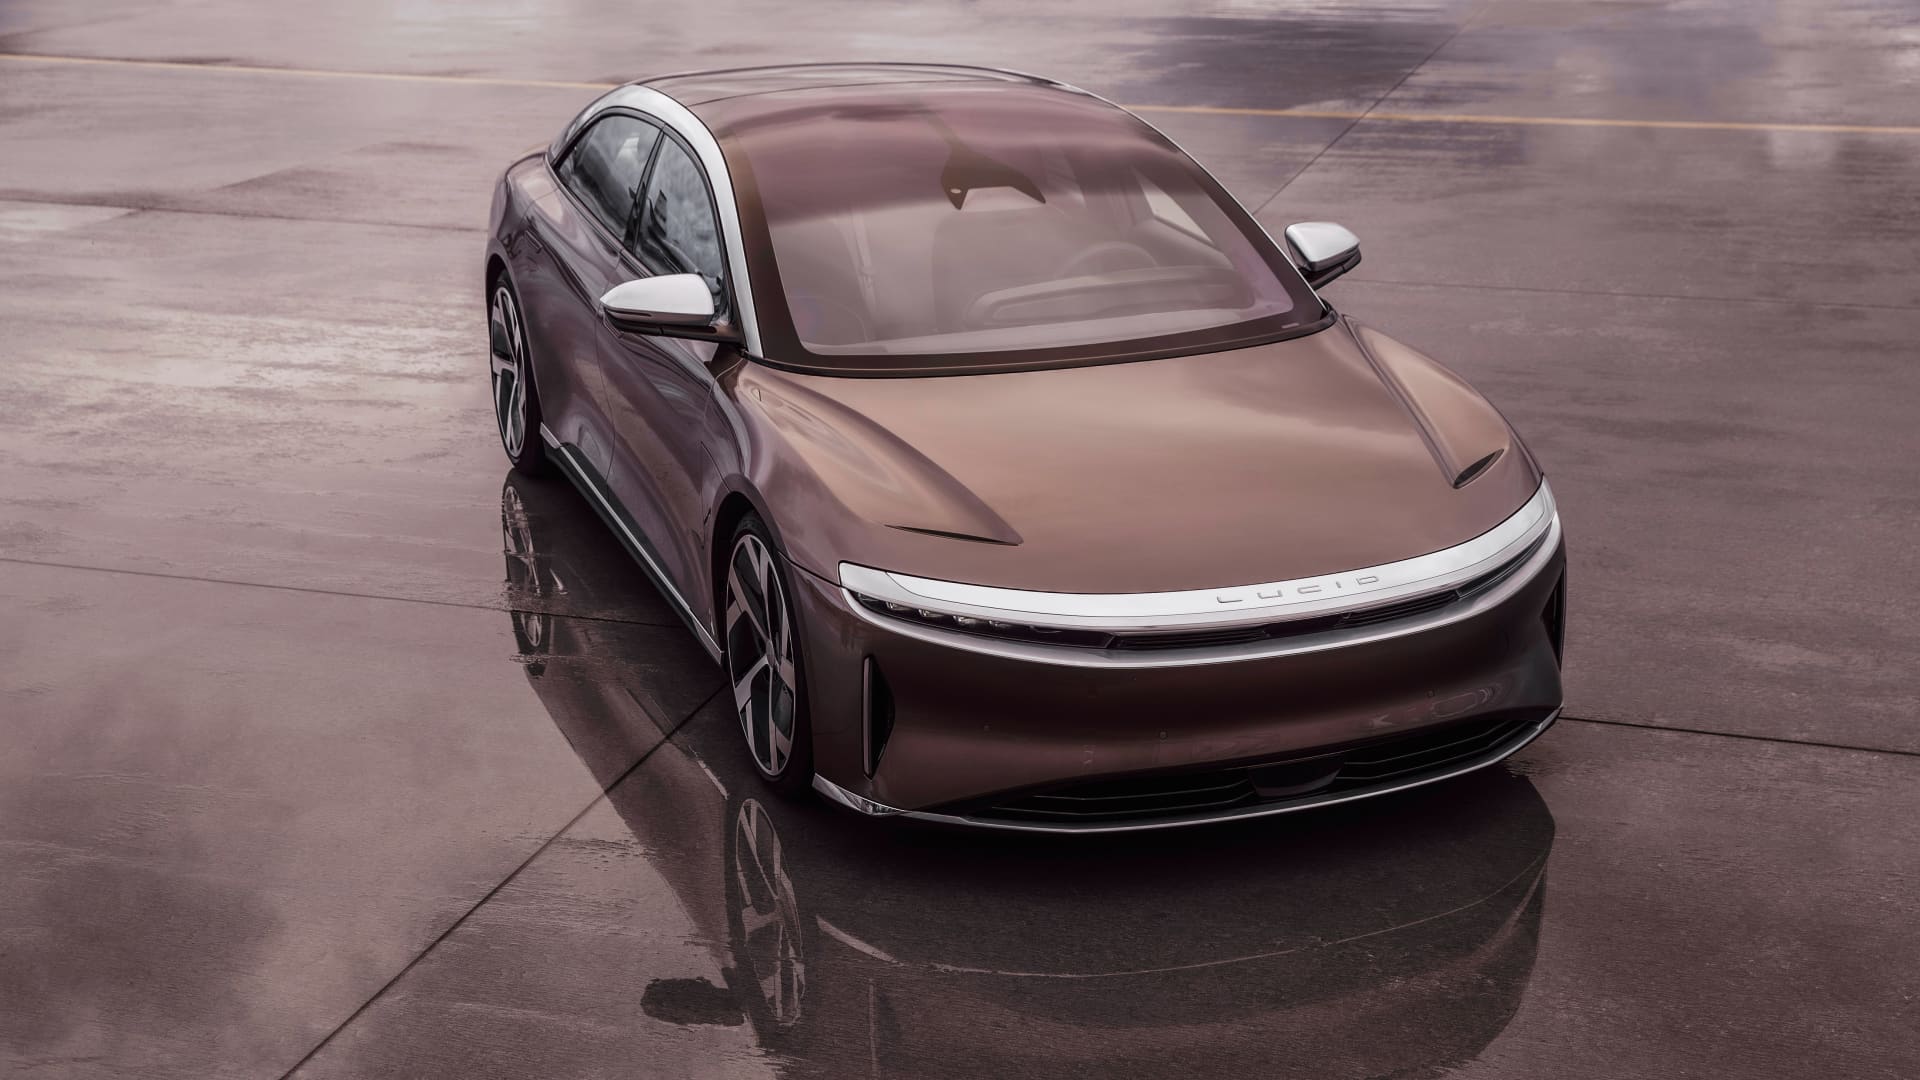 Exterior of the Lucid Air sedan, which debuted Sept. 9, 2020 as the company's first production vehicle.